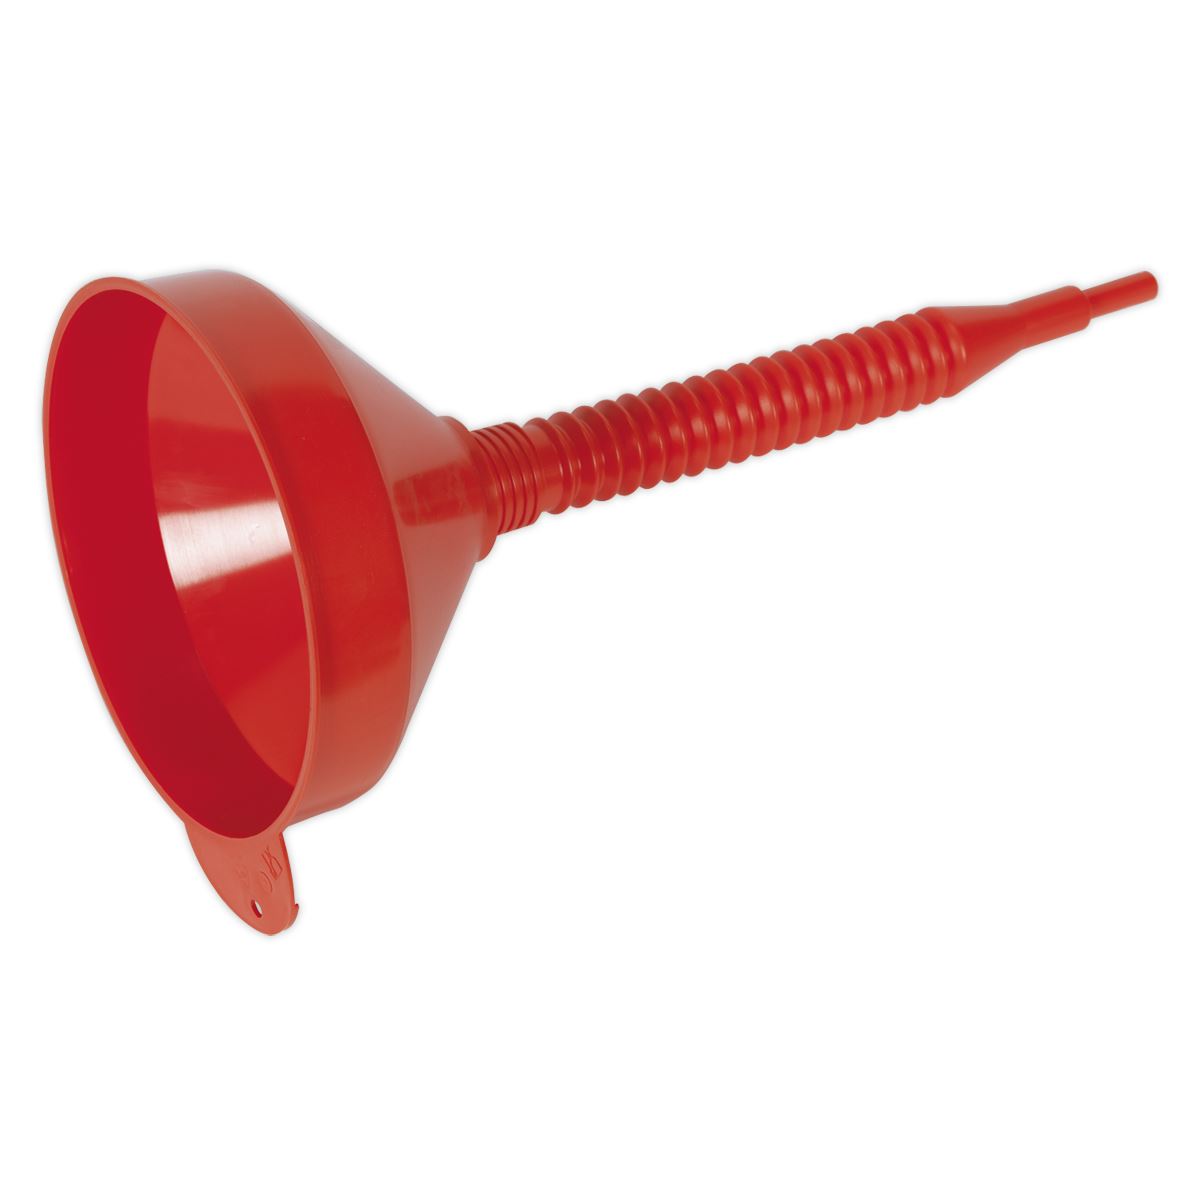 Sealey Flexi-Spout Funnel Medium Ø200mm with Filter